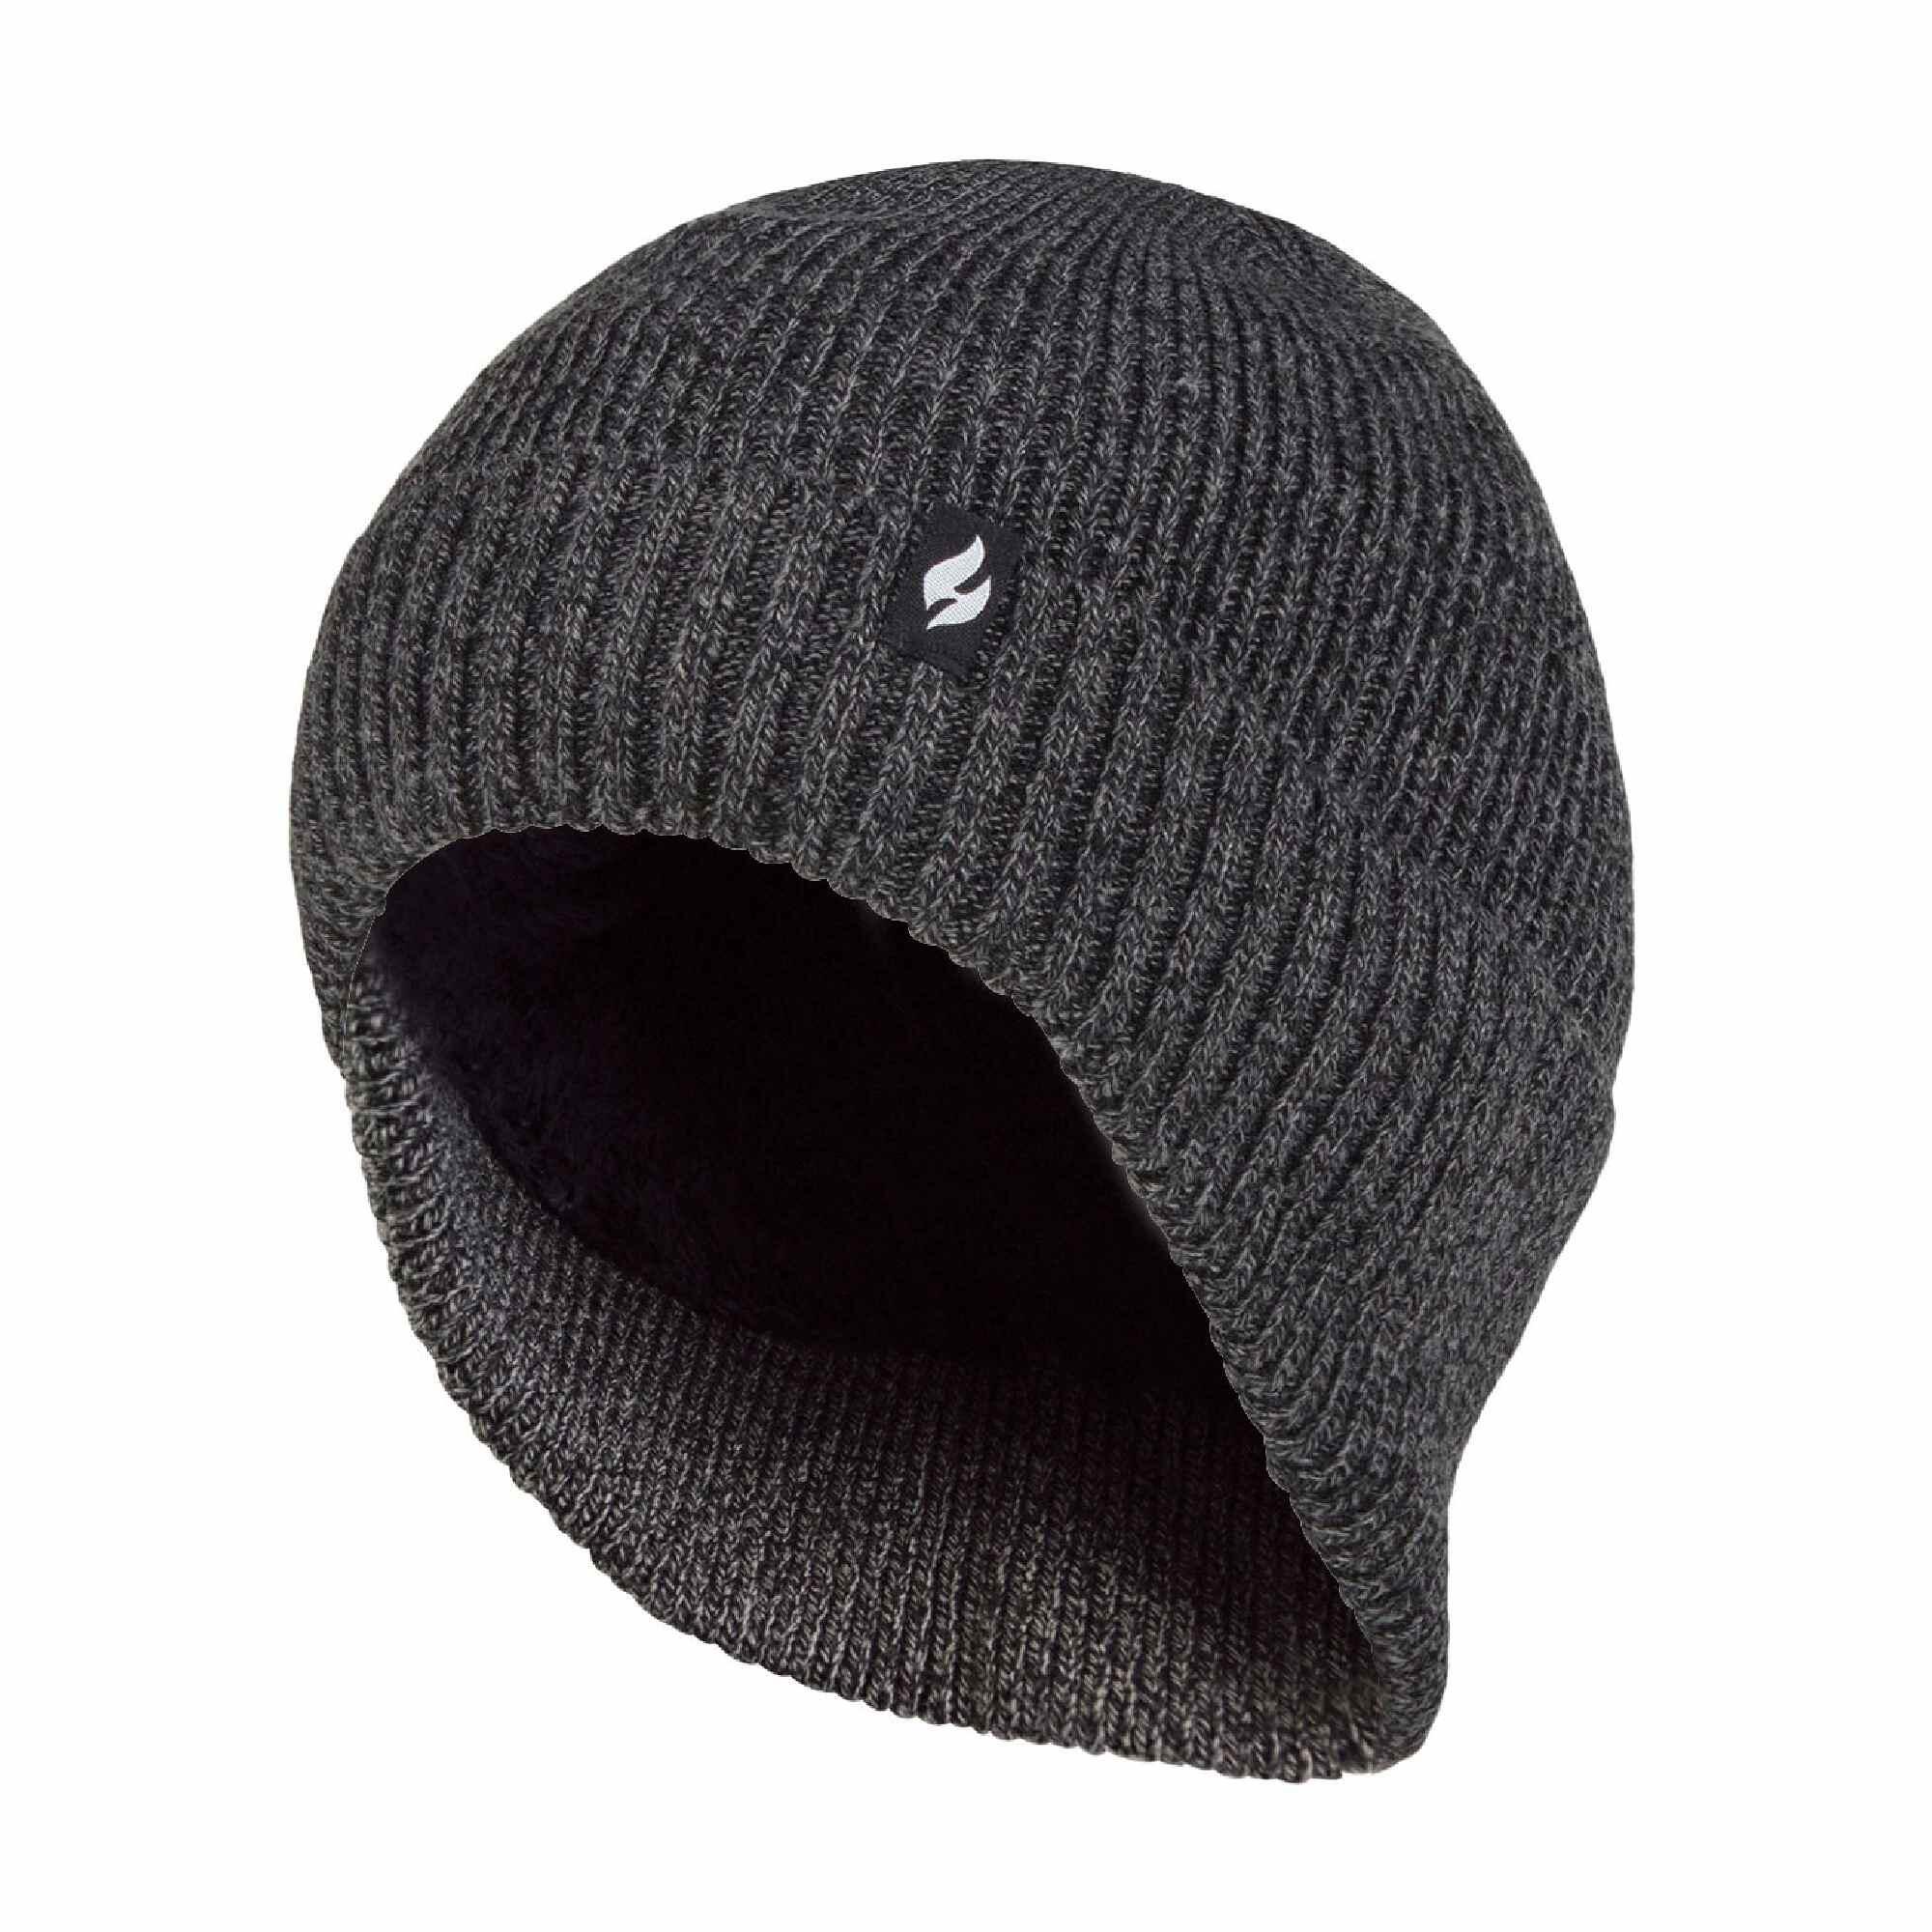 HEAT HOLDERS Thermal Winter Warm Expedition Hat with Drop Neck for Men